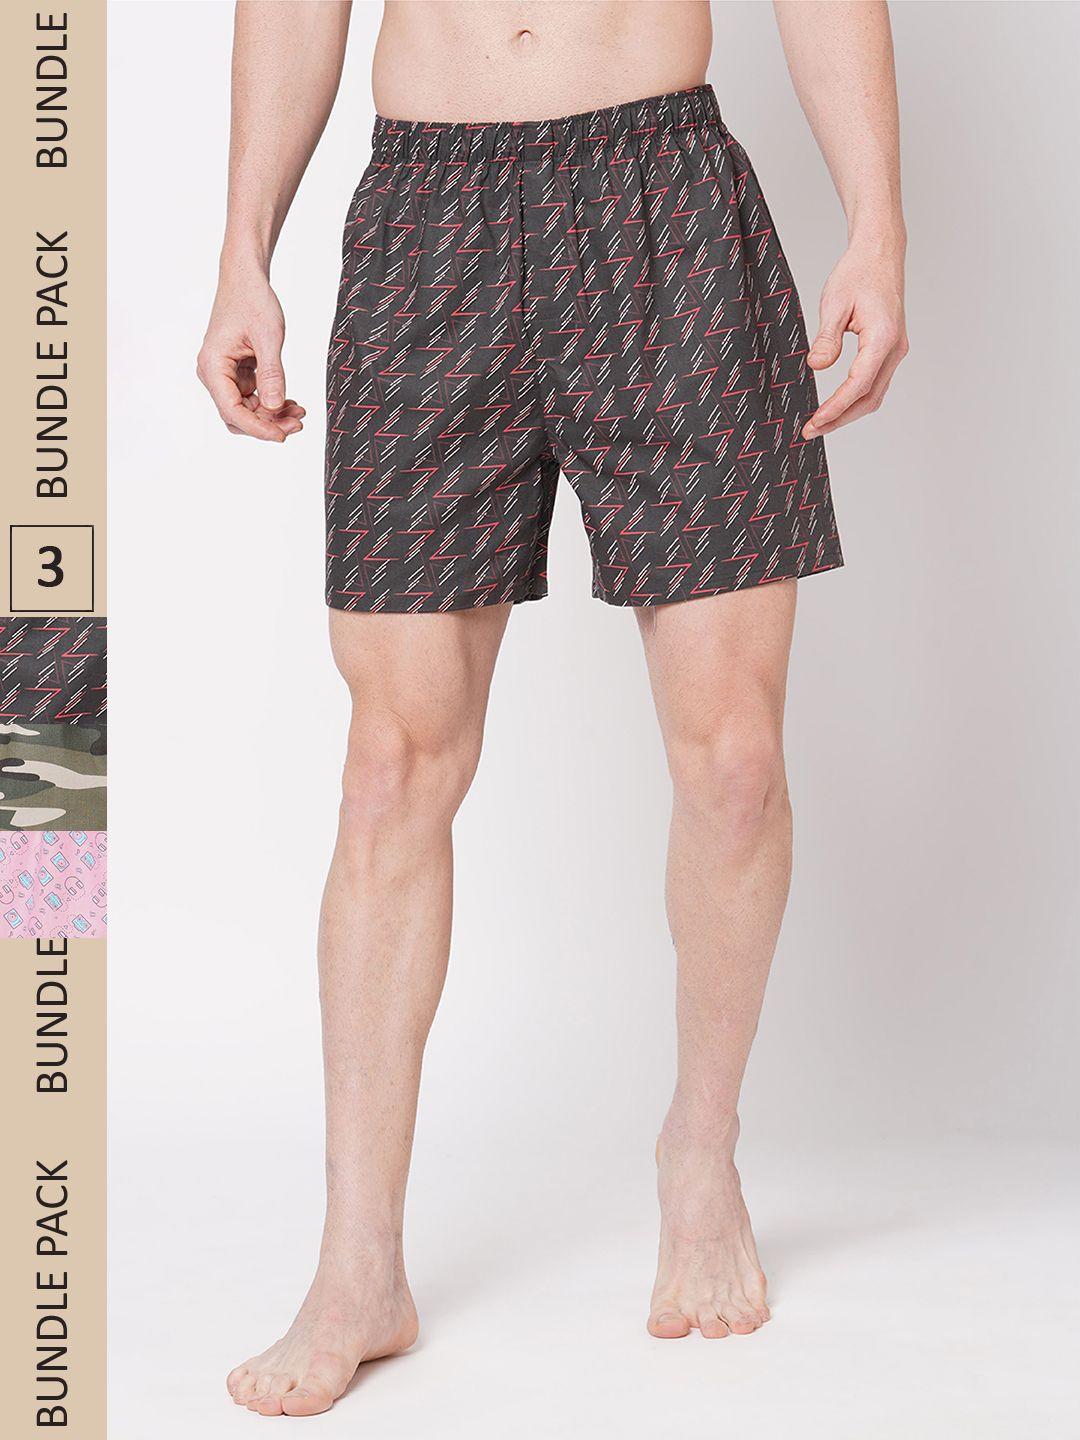 fitz men pack of 3 printed cotton boxers aw22-so-65pebkywpi-1796-m